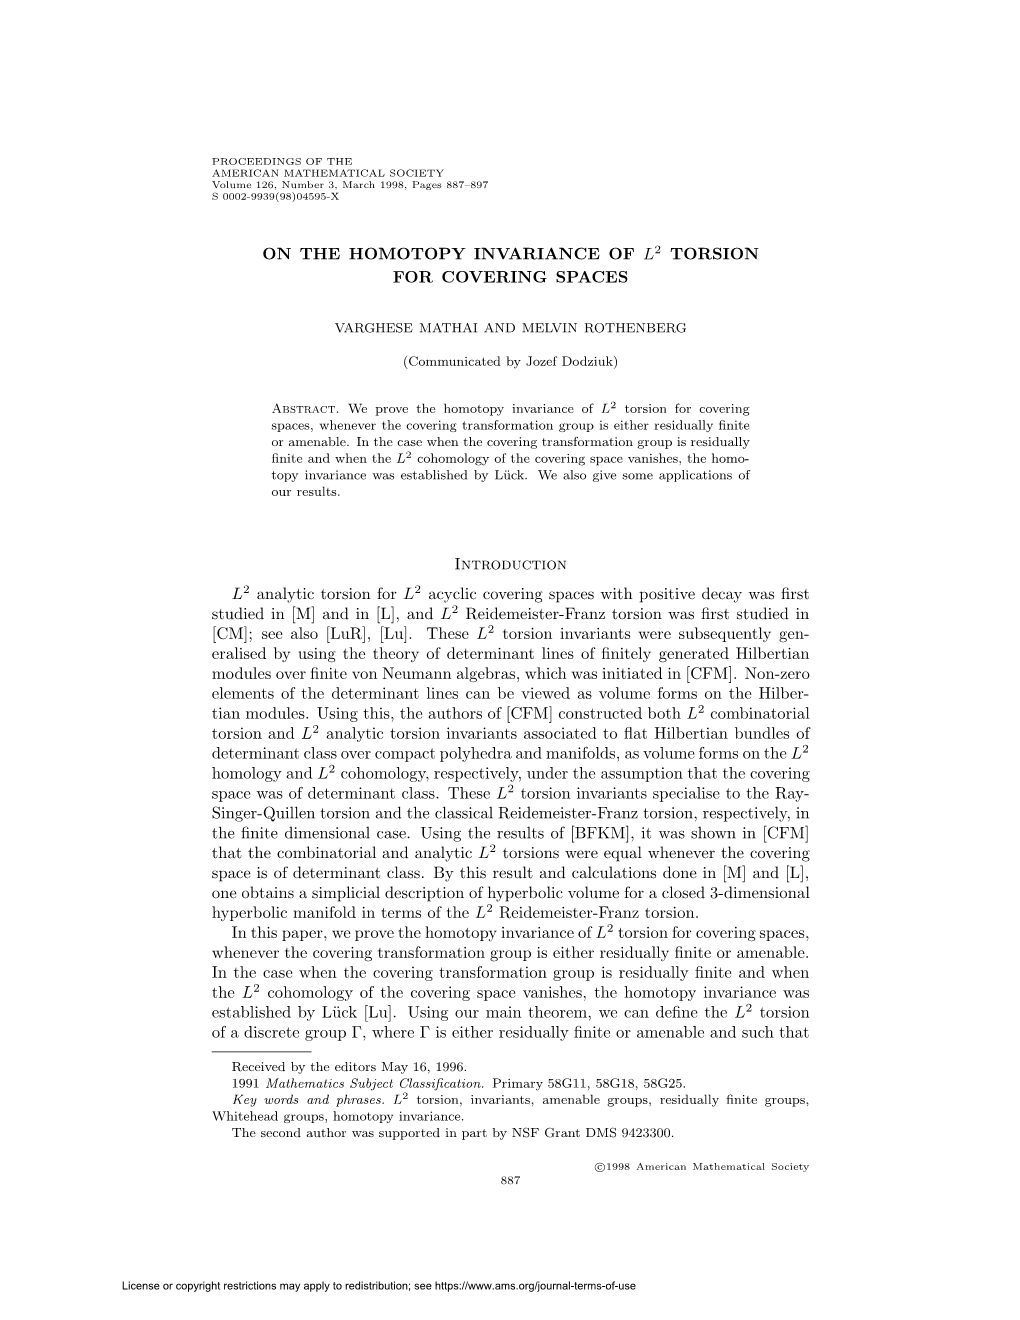 On the Homotopy Invariance of L2 Torsion for Covering Spaces